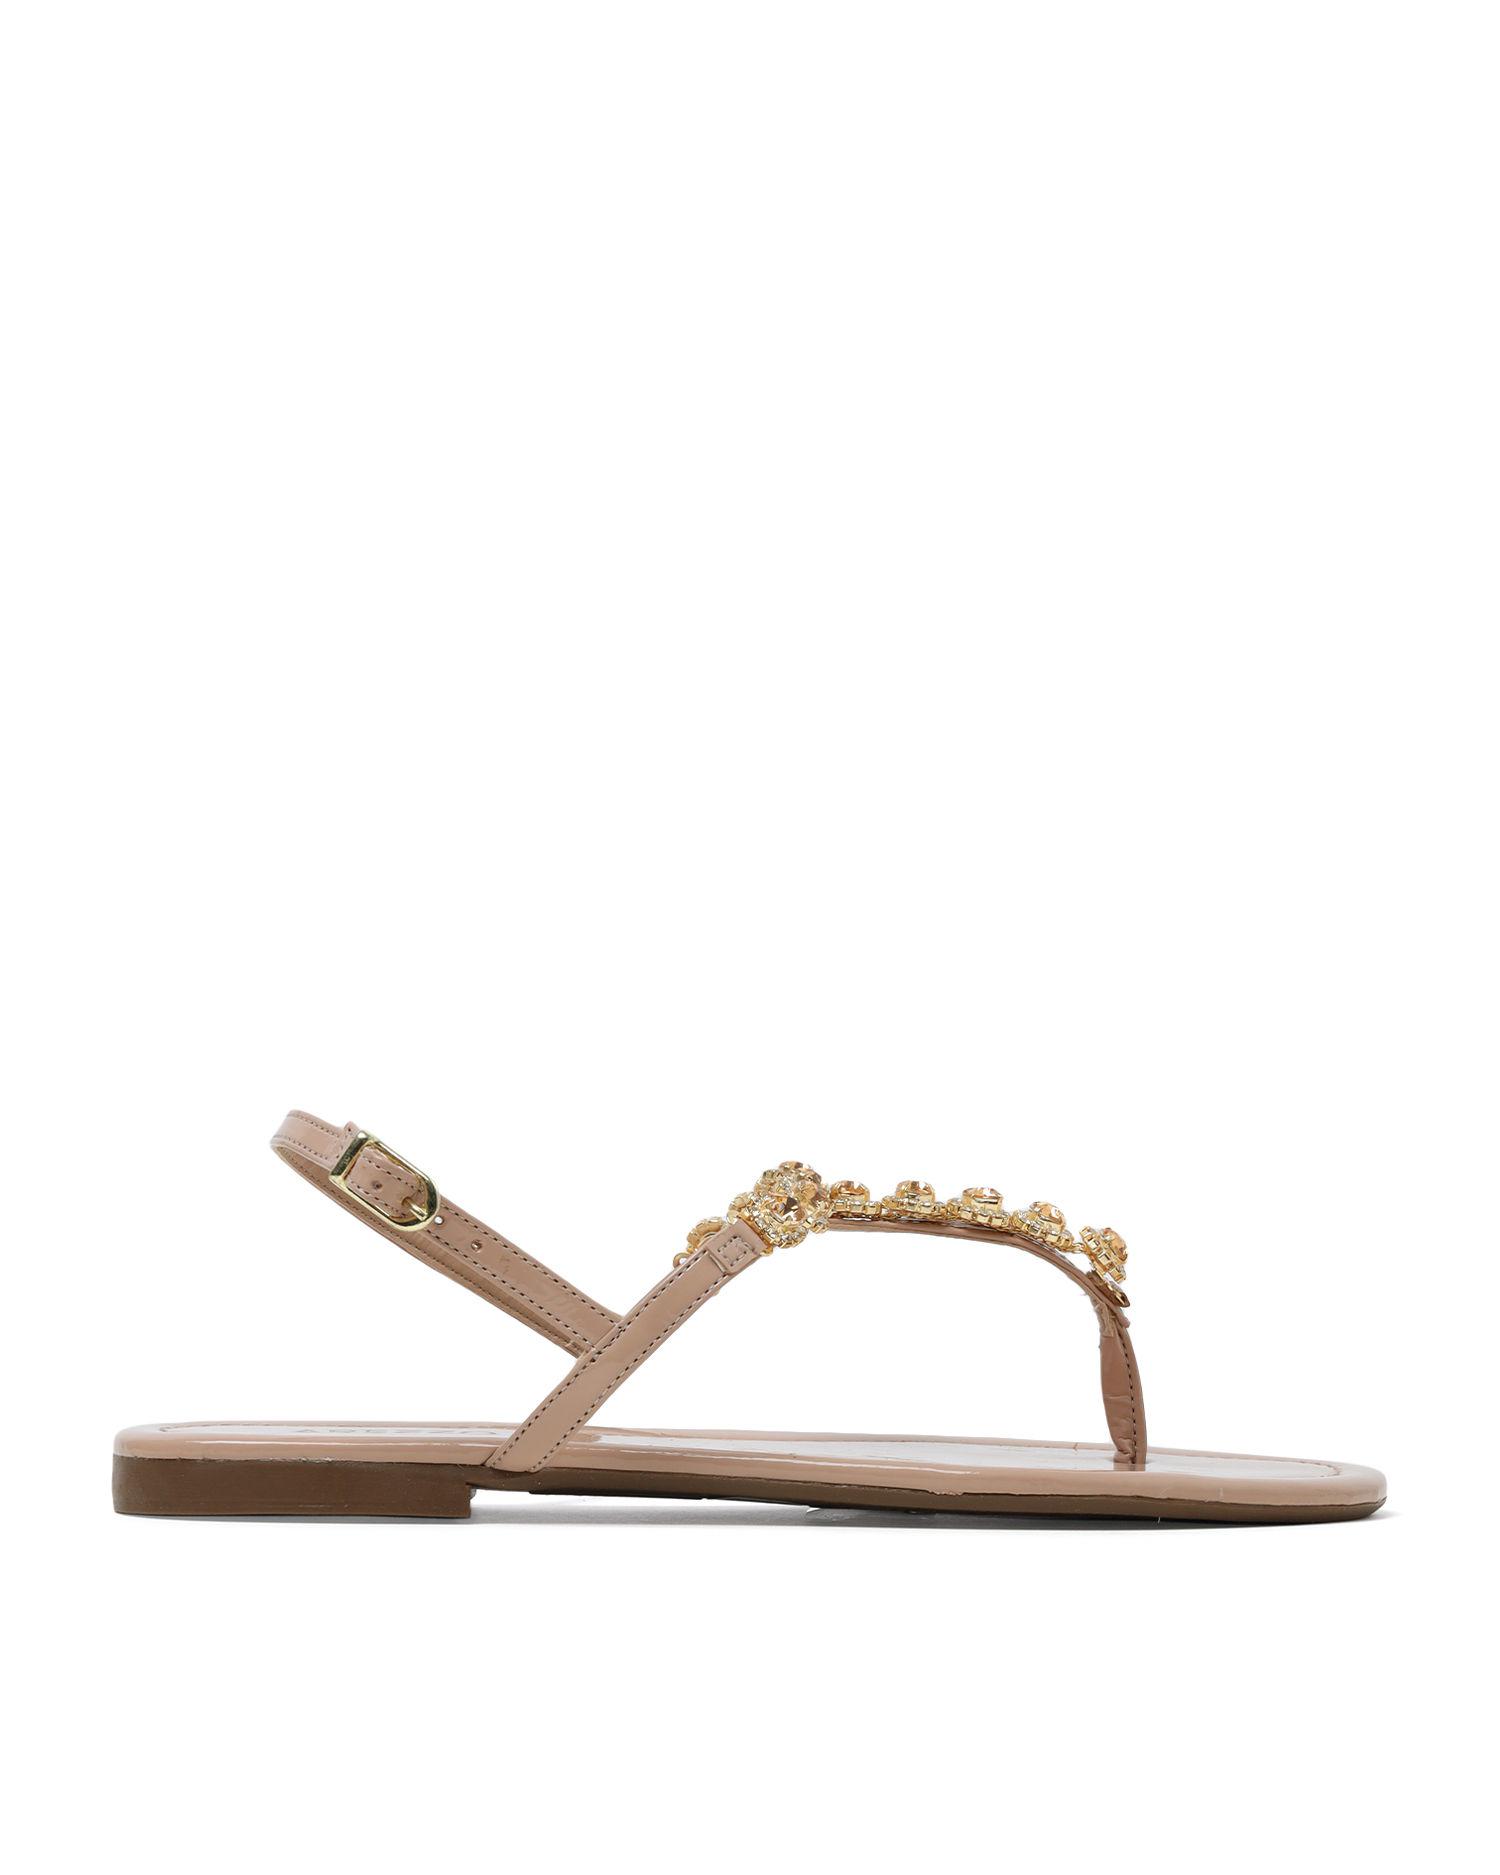 Strapped sandals by AREZZO